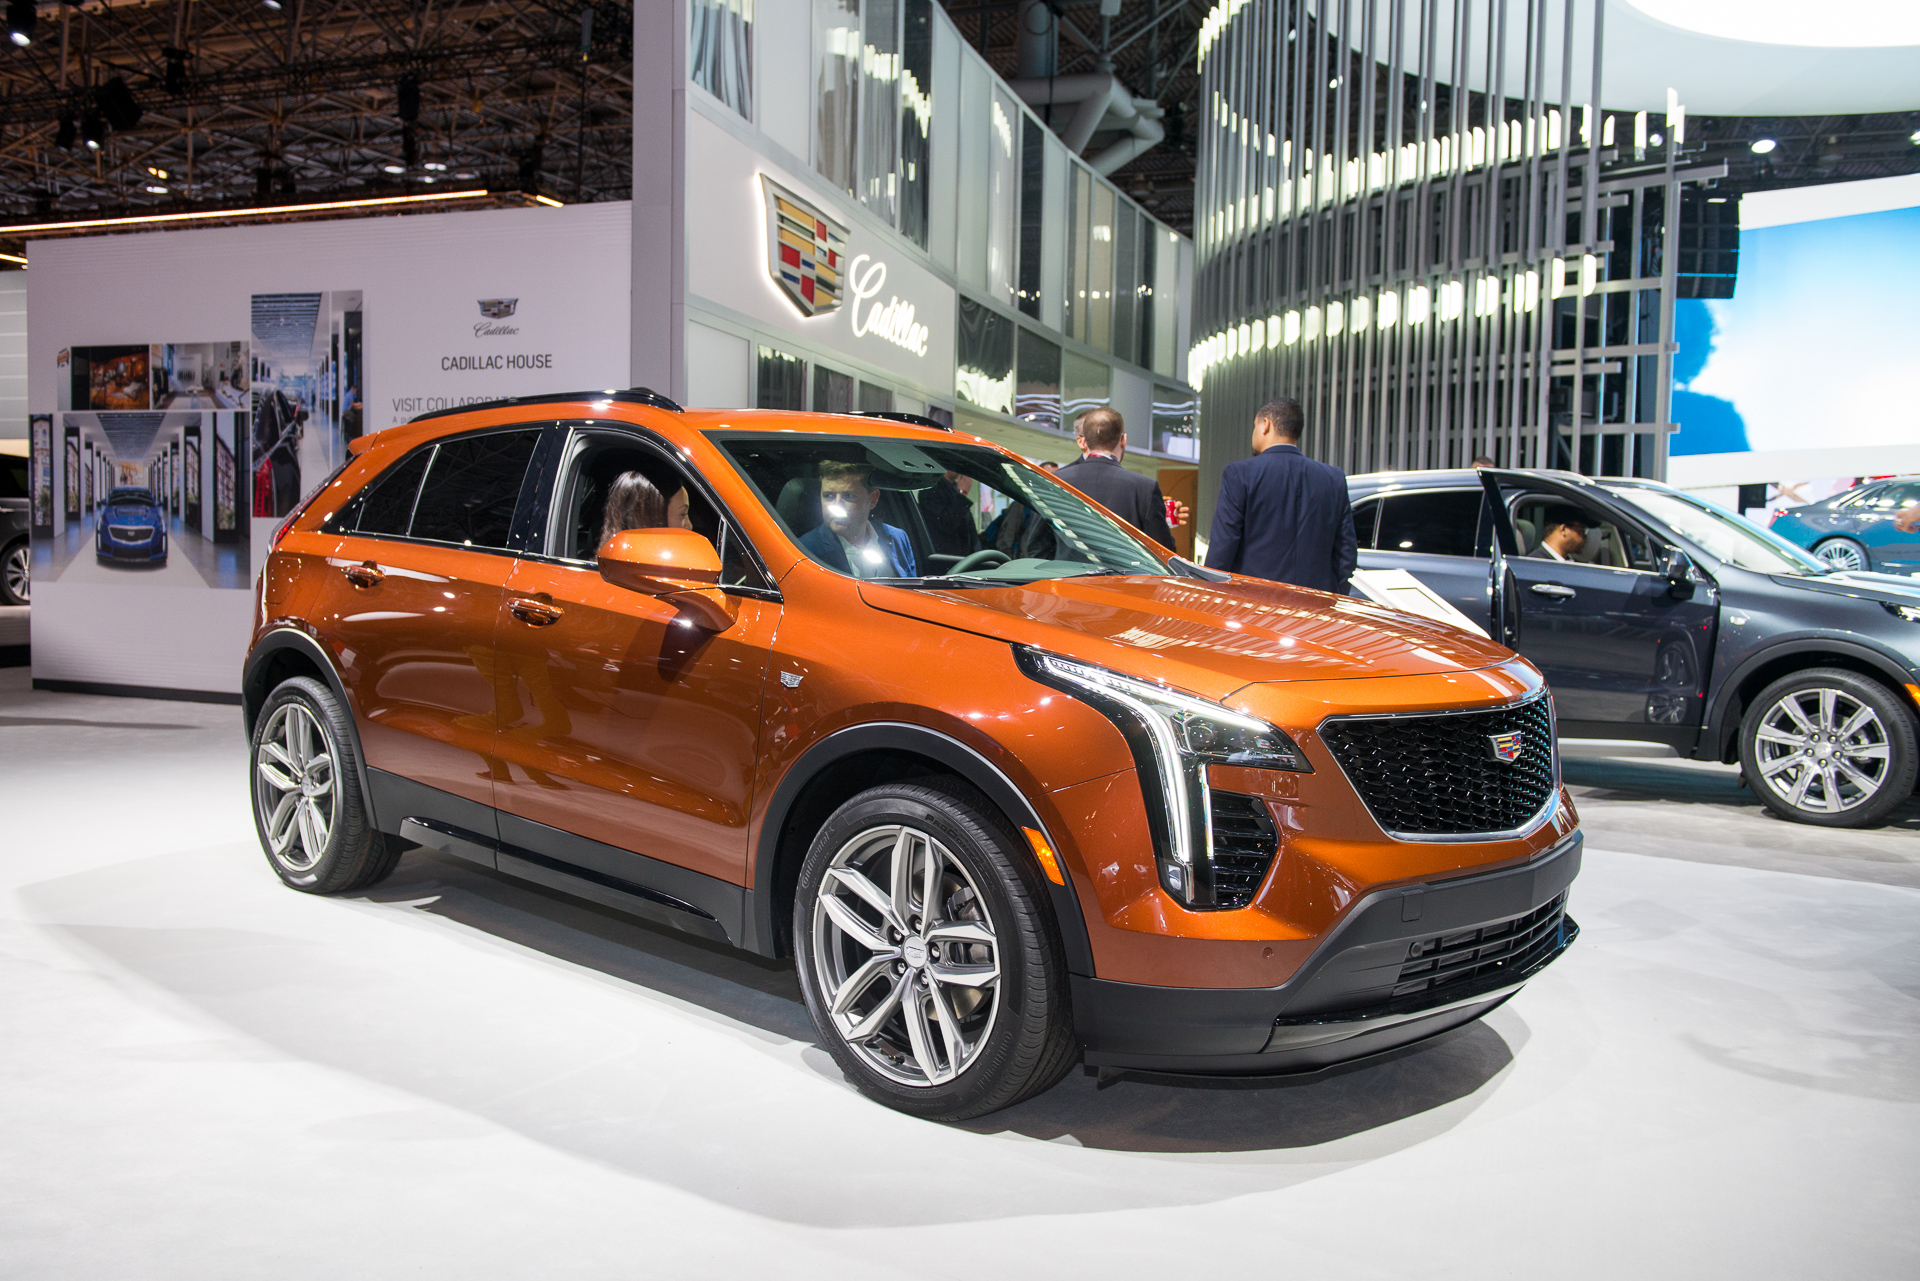 2019 Cadillac Xt4 Crossover Suv Looks Good Feels Like More Of The Same